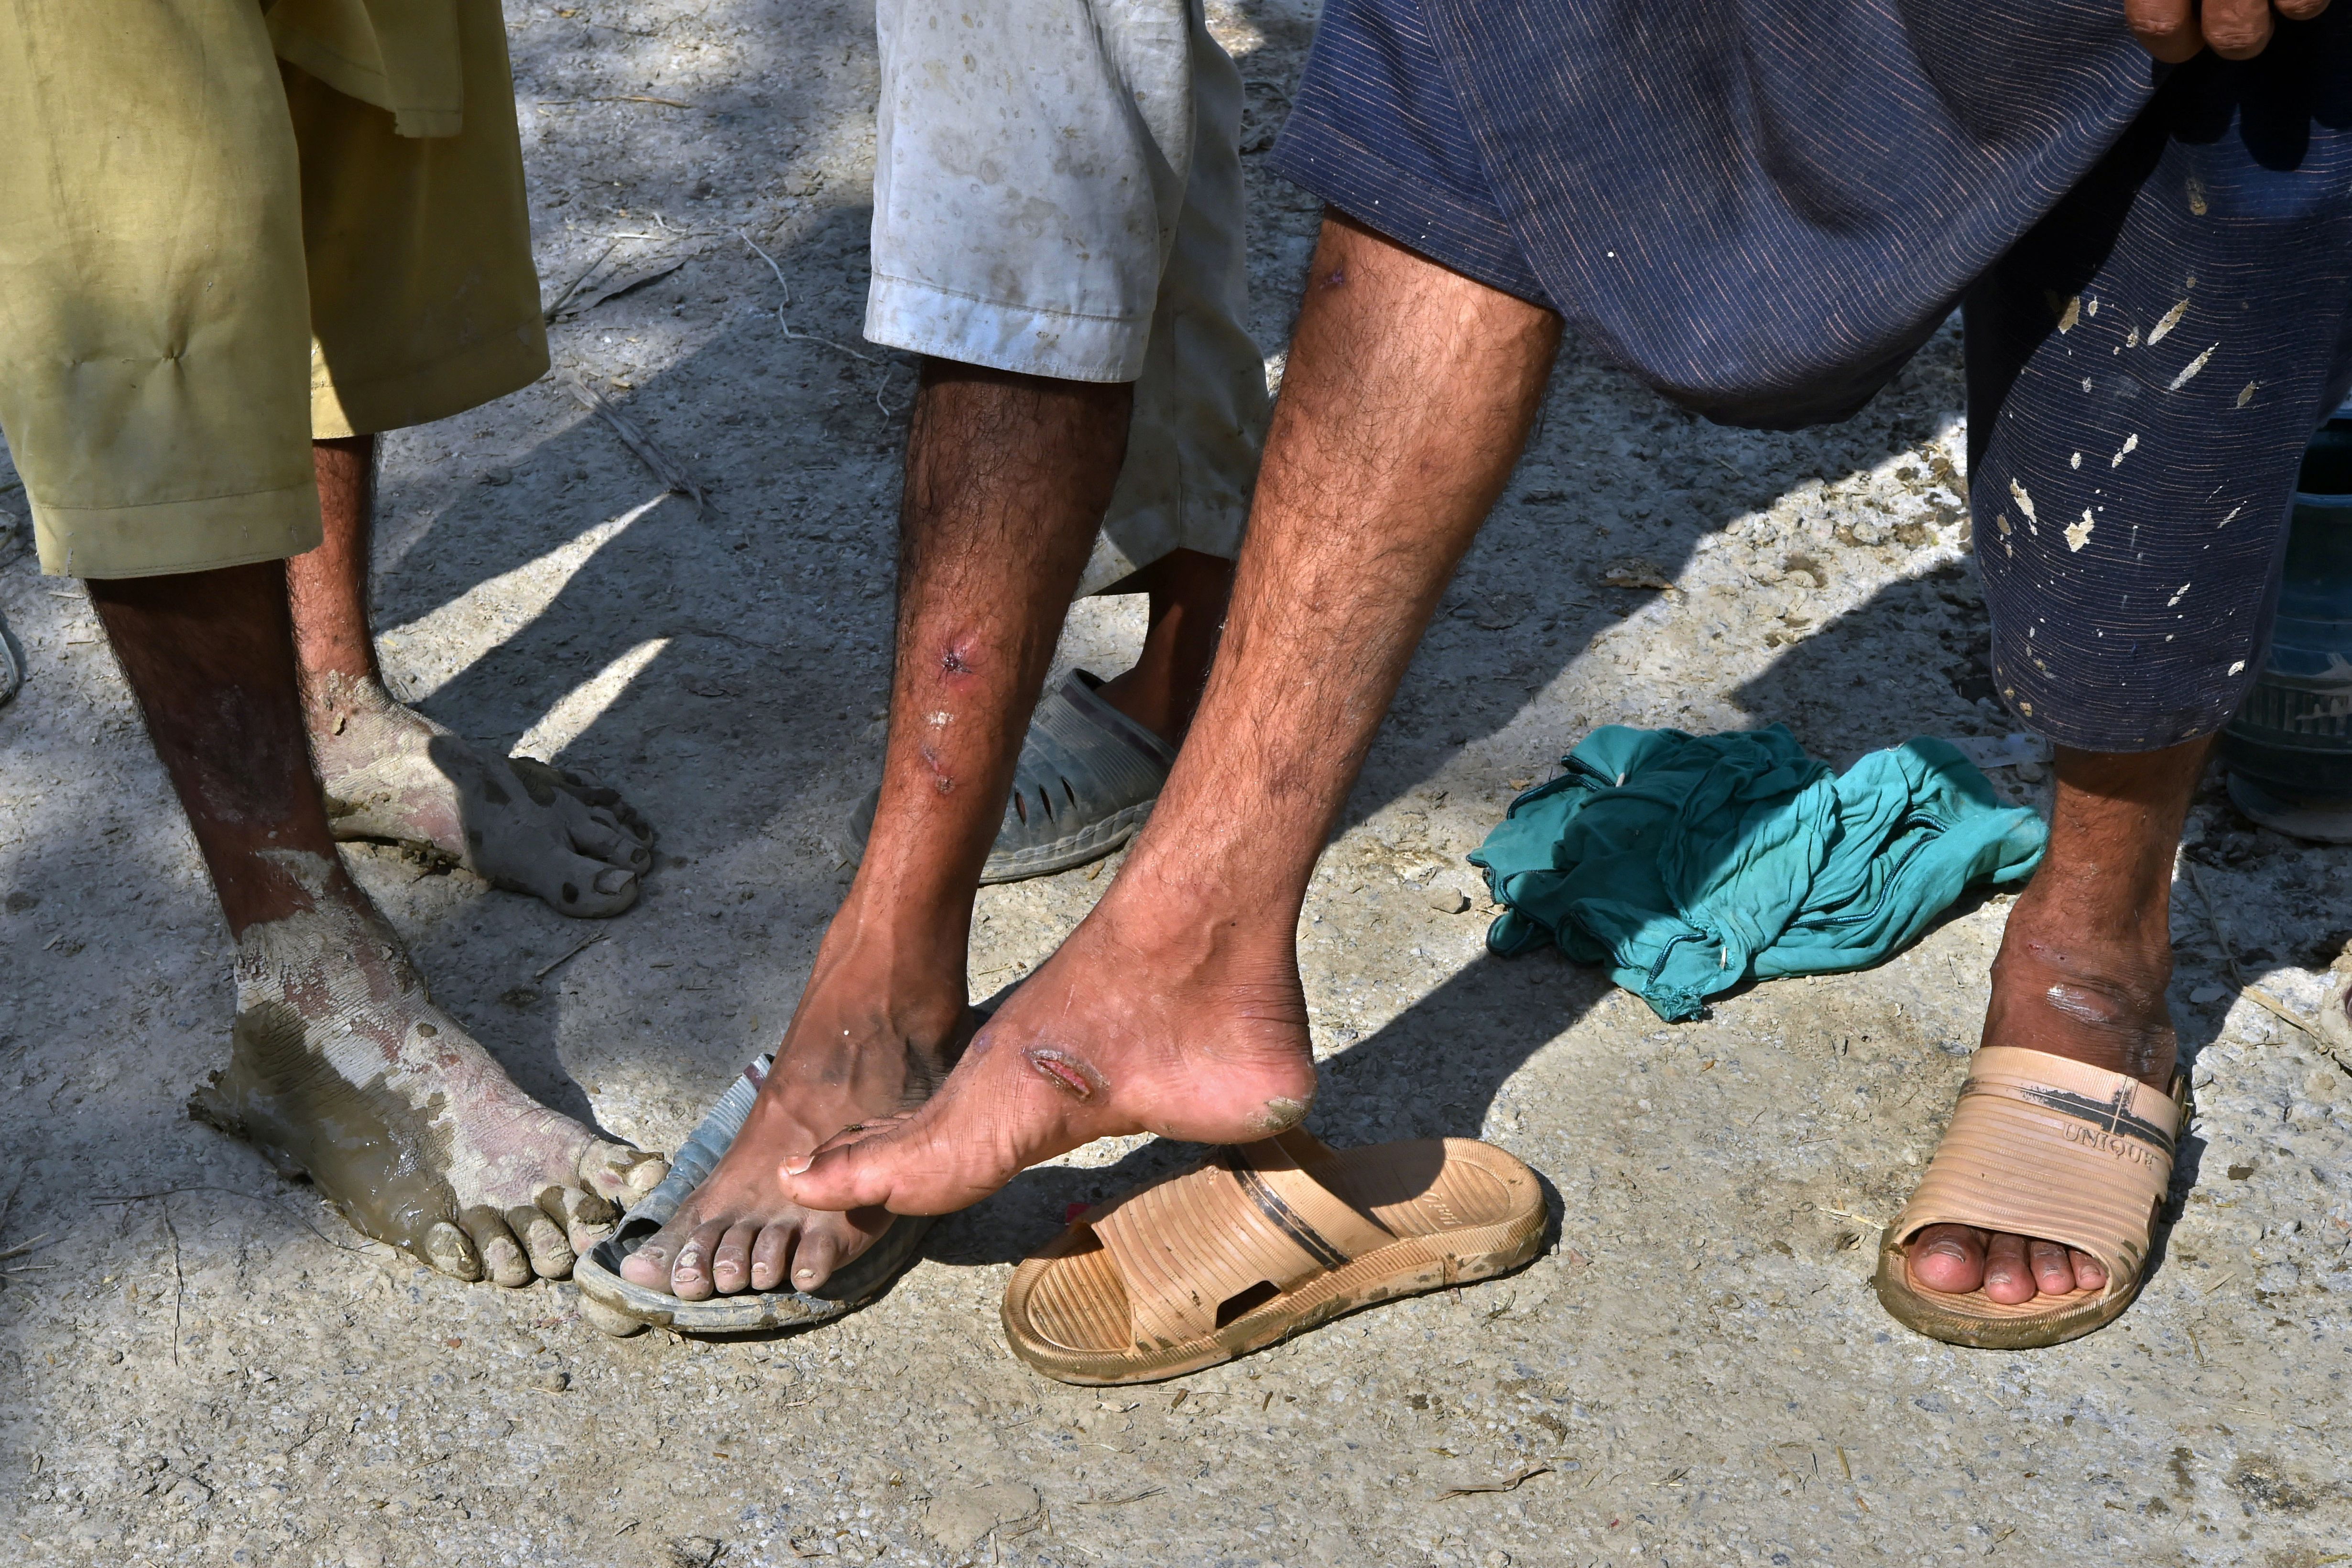 Flood-affected people show their infected legs at Jindi village in the Charsadda district of Khyber Pakhtunkhwa